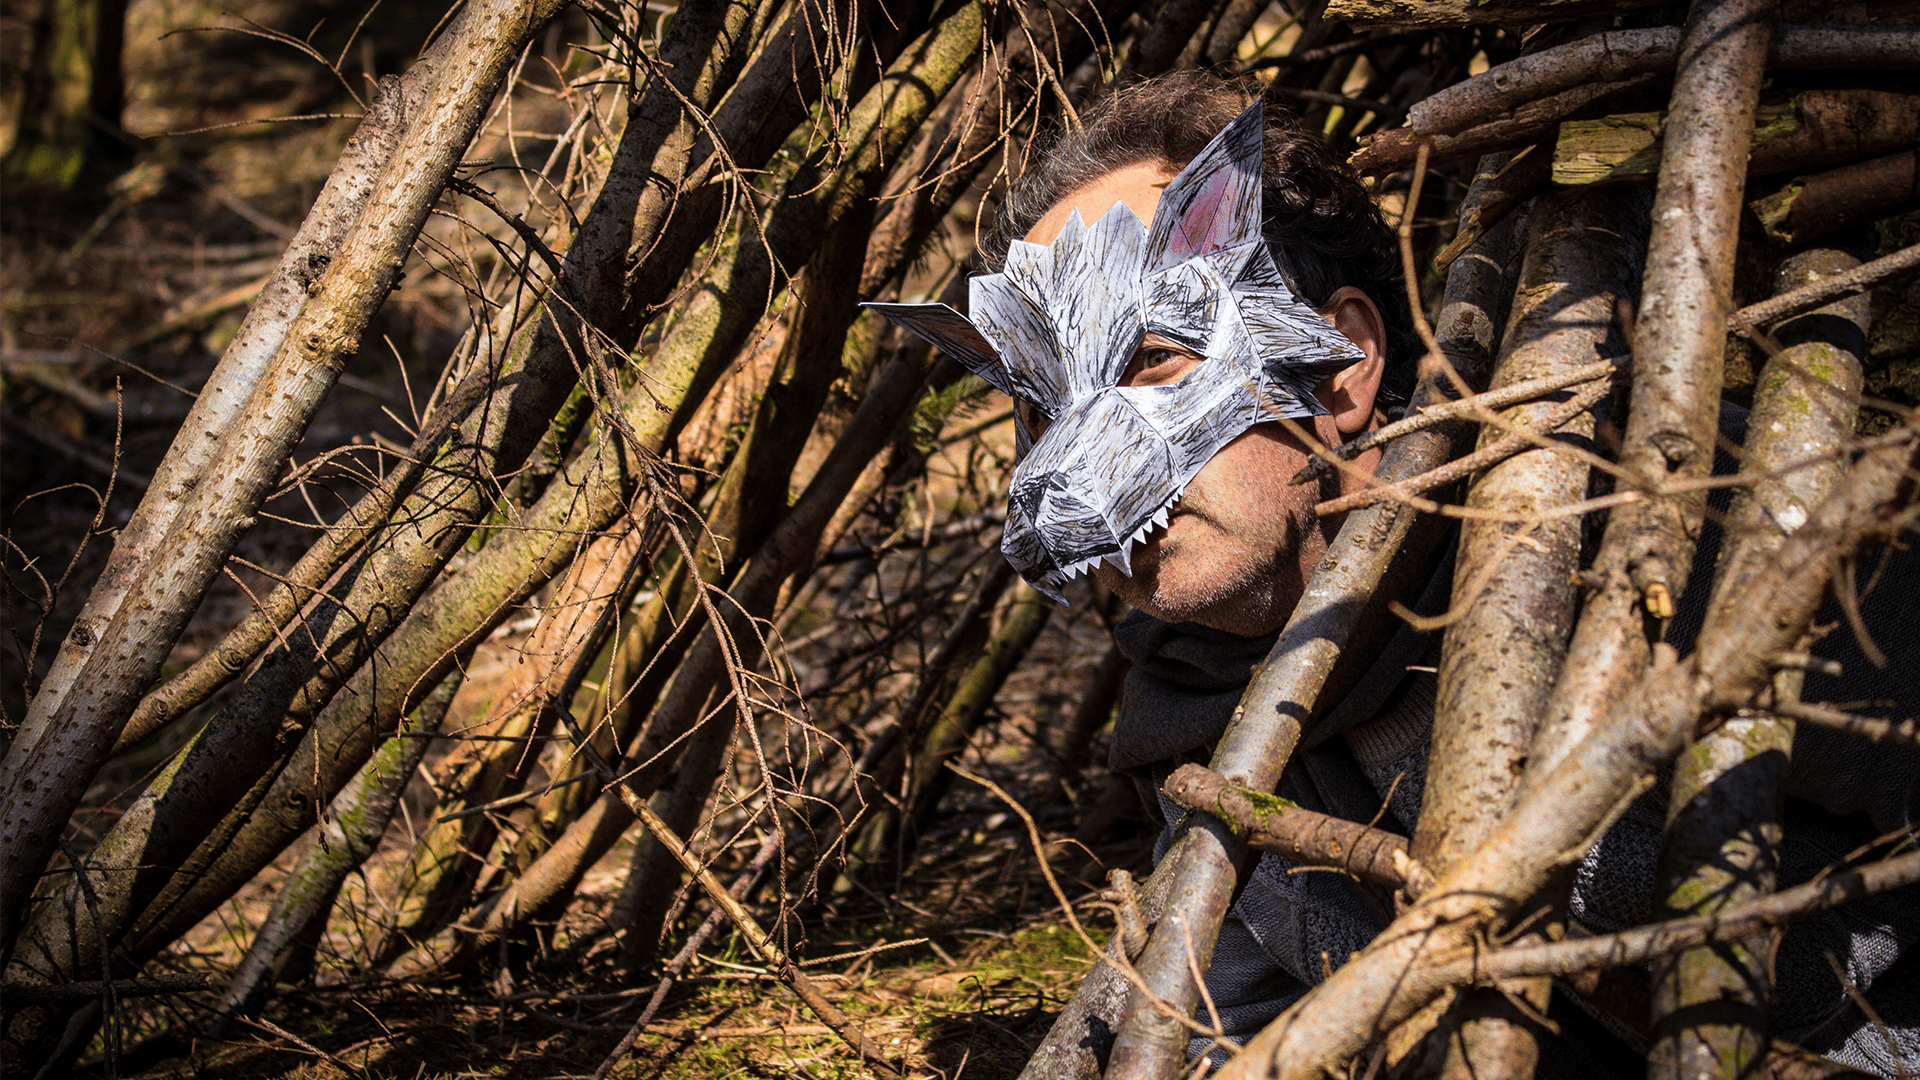 The Big Bad Wolf hiding between branches, portrayed by an actor wearing grey clothing, a grey scarf, fingerless gloves and a very intricate and geometric wolf's mask